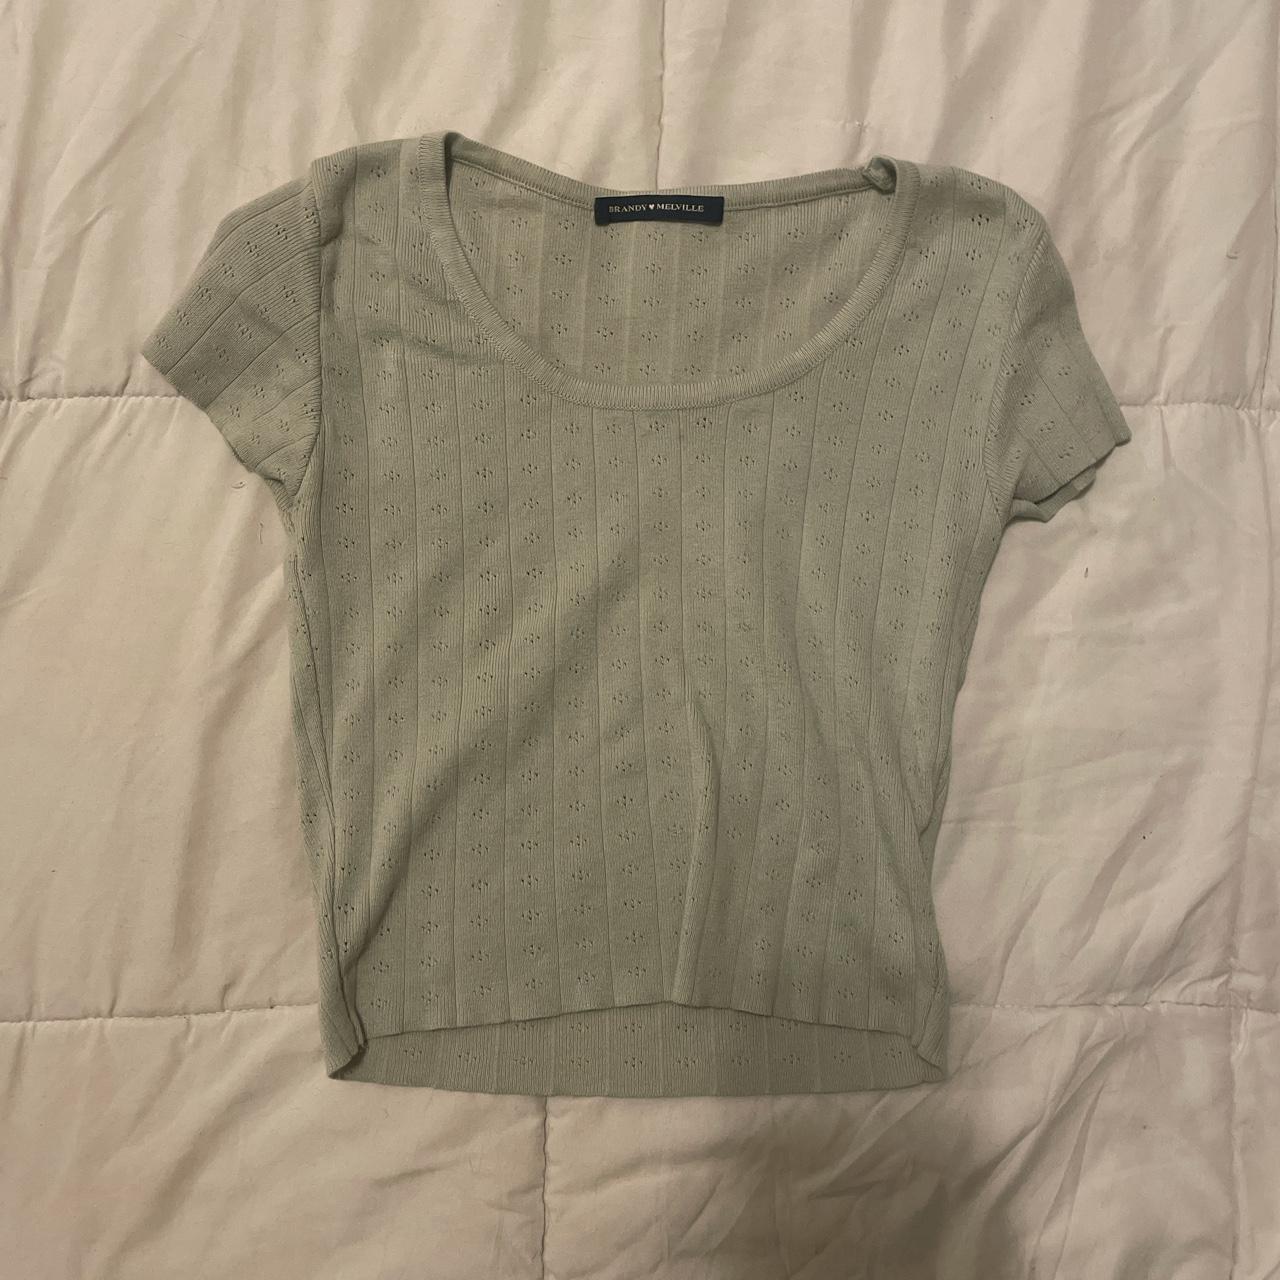 Product Image 1 - Brandy Melville green knit rubbed